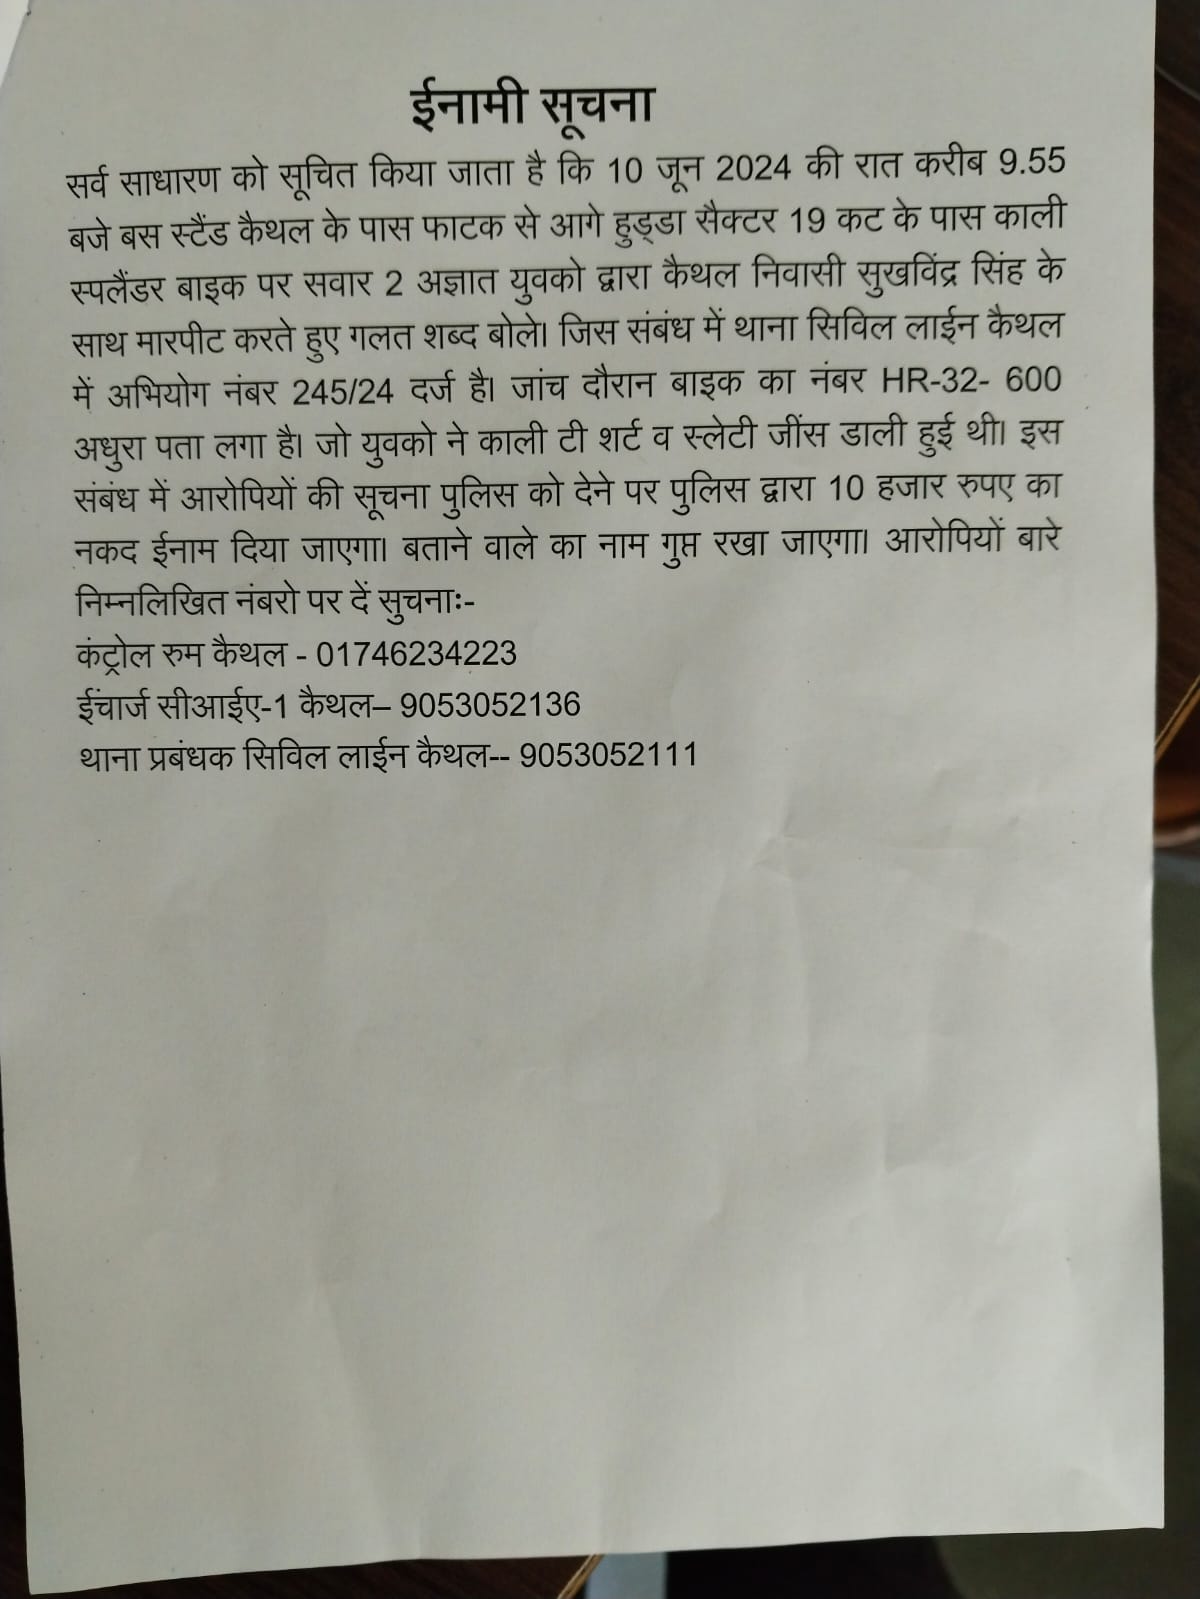 Miscreants beat up a Sikh youth by calling him a Khalistani in Kaithal of Haryana  along with SIT investigation a reward of Rs 10000 was announced